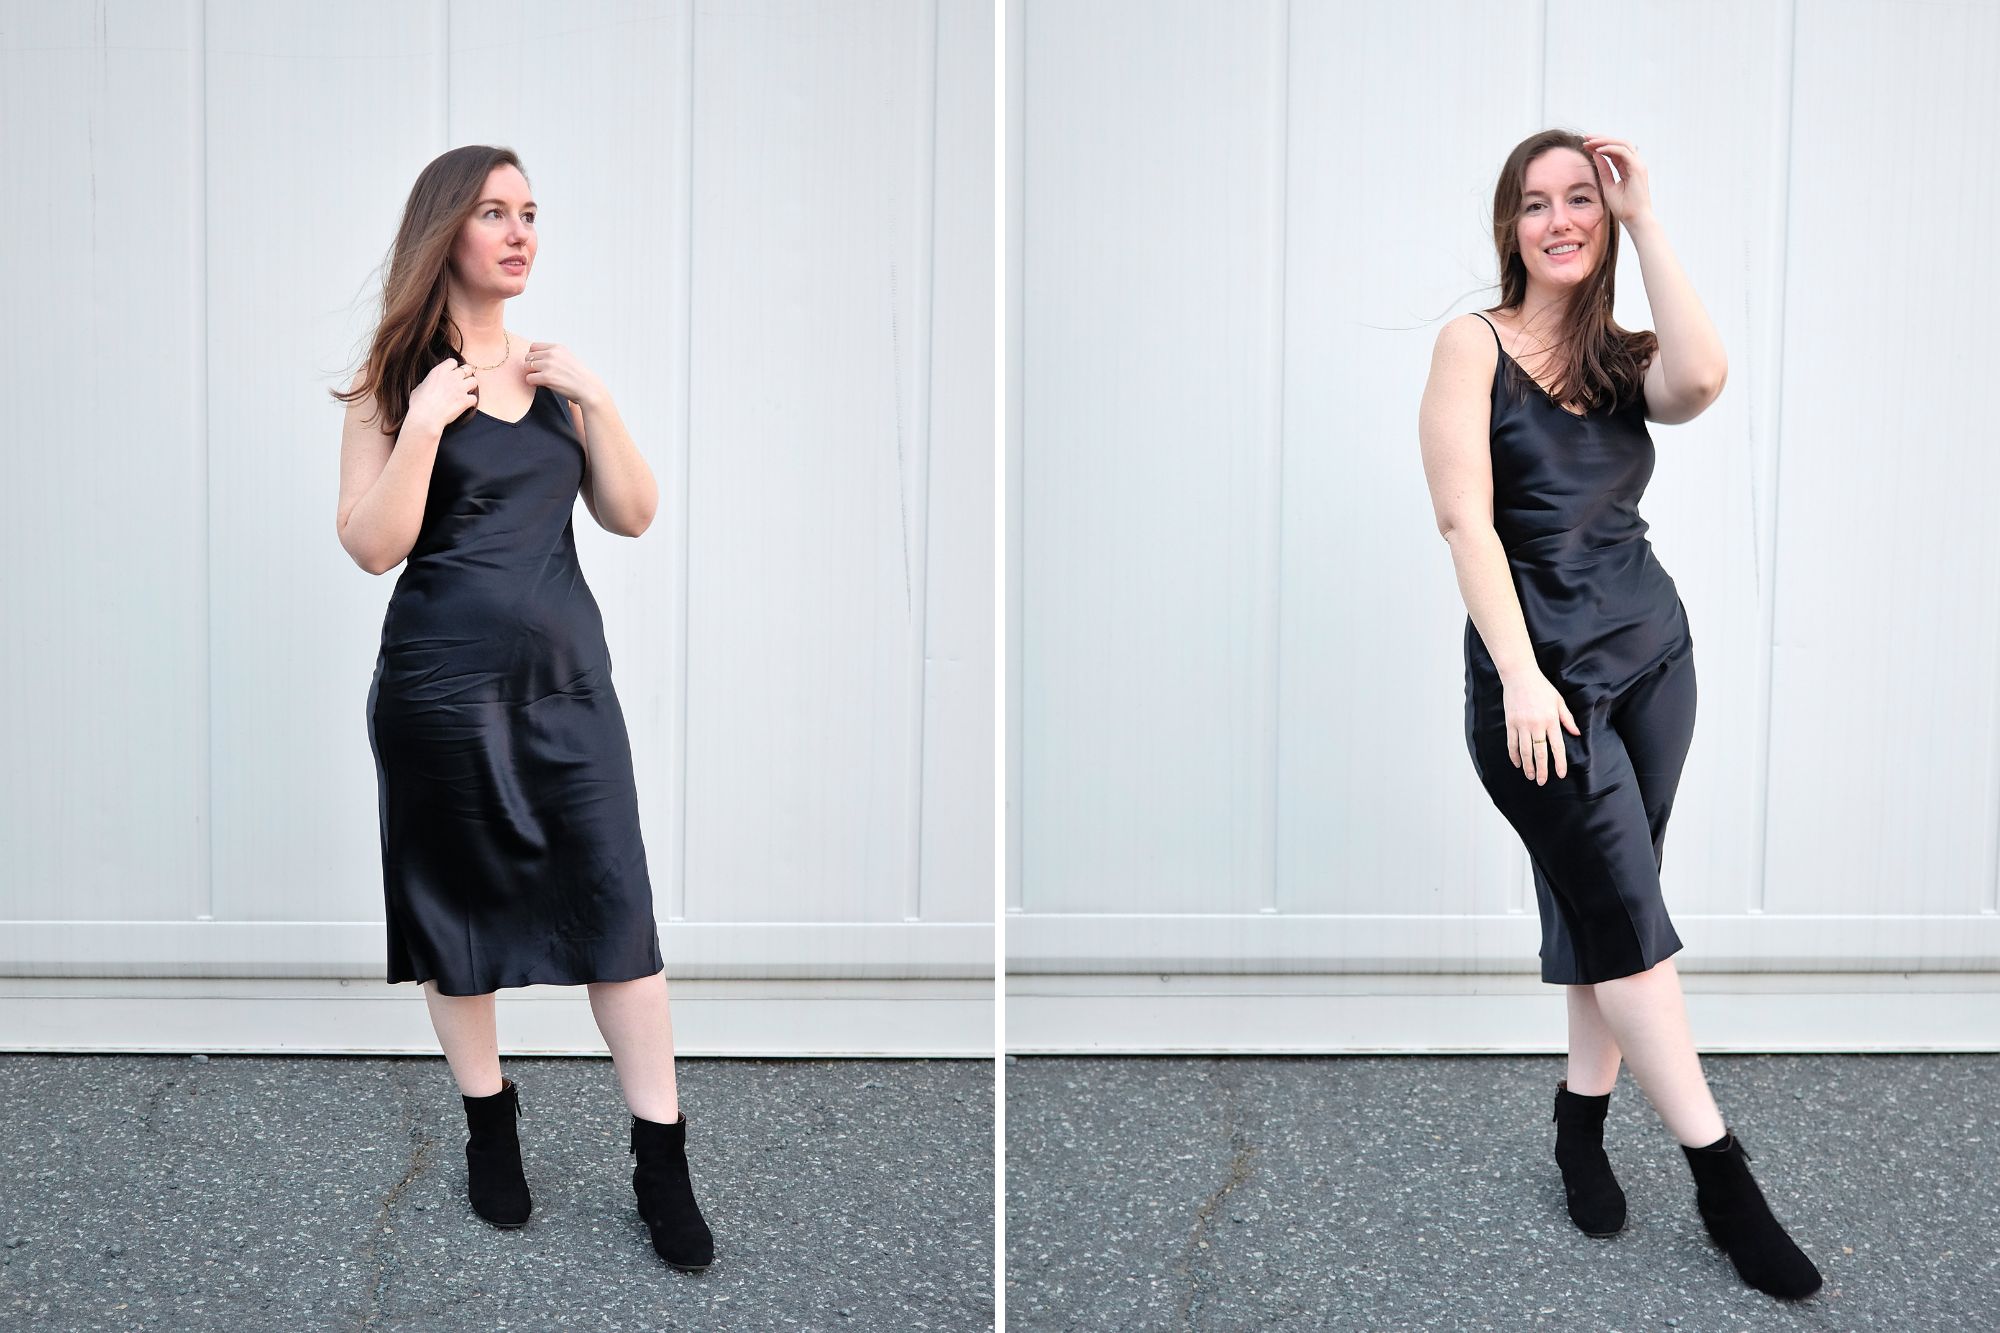 Alyssa wears the Quince Silk Slip Dress in black with black boots